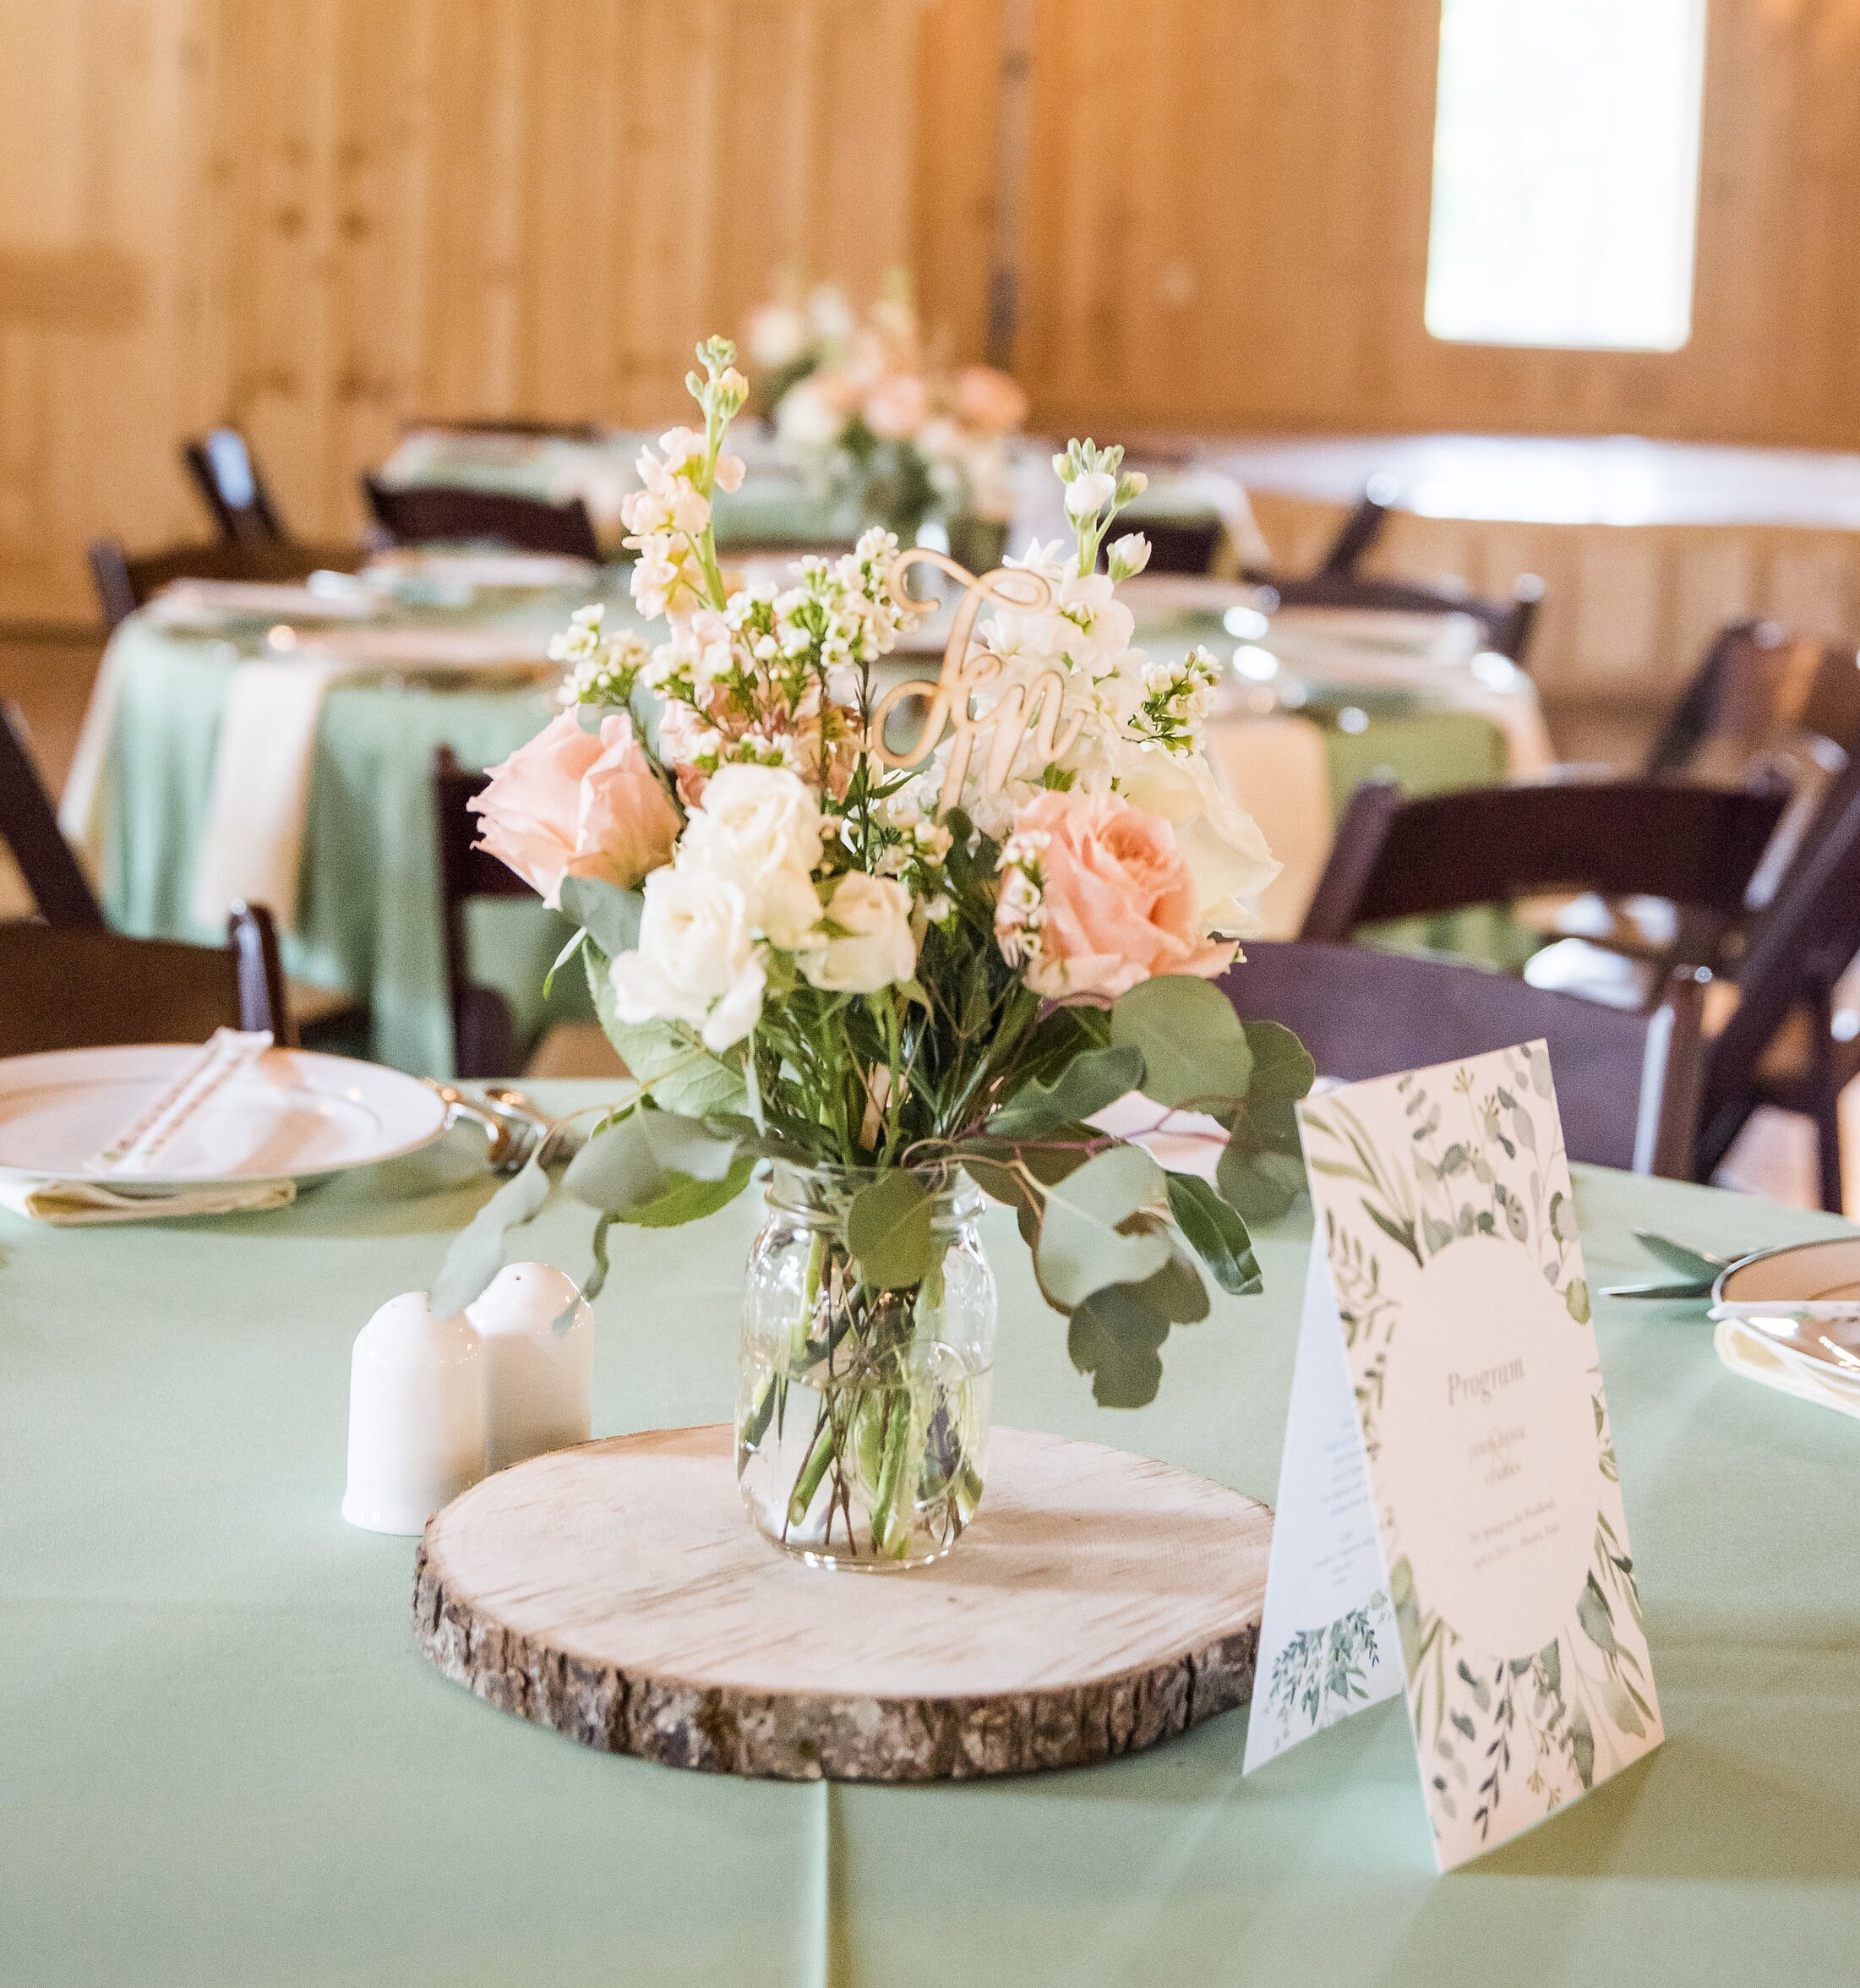 Rustic Wood Slices for Centerpieces